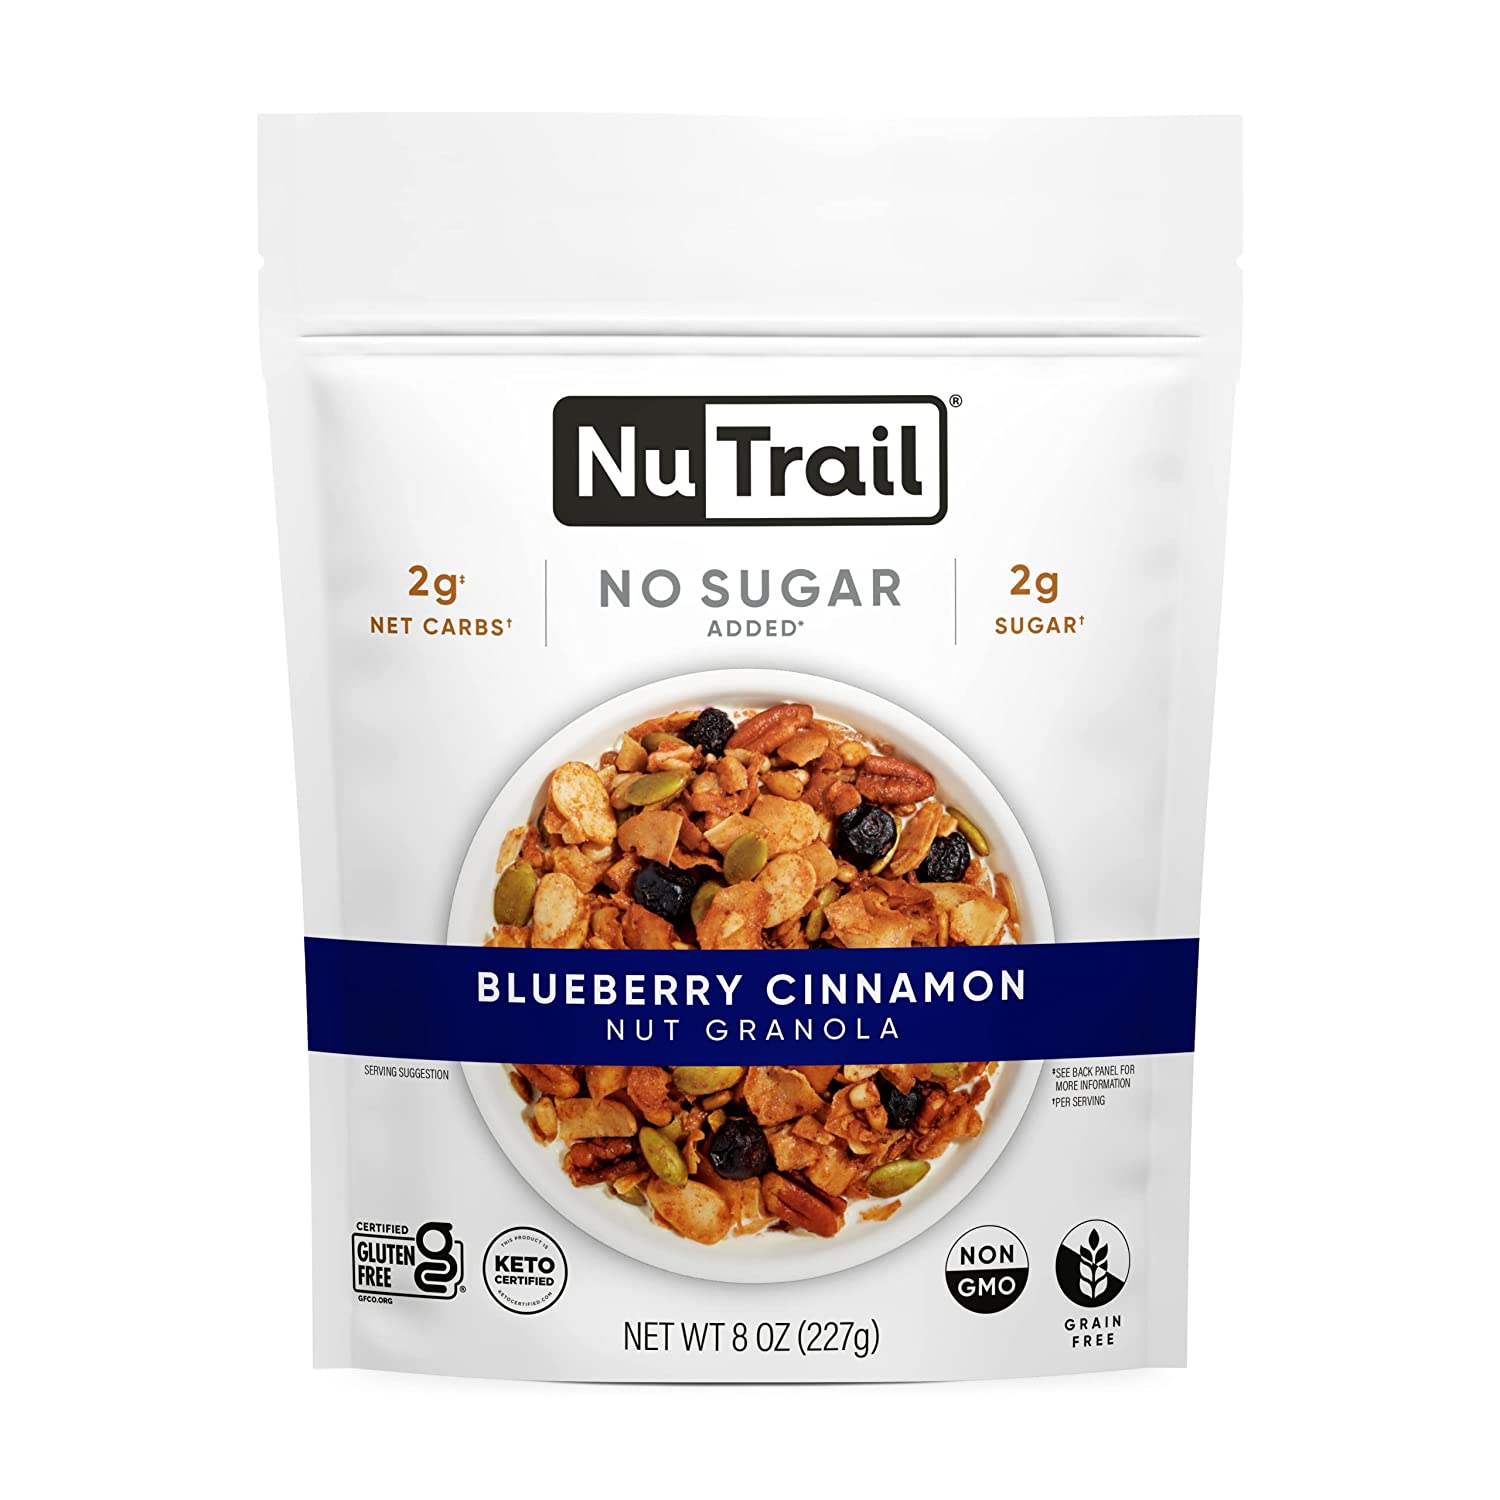 NuTrail Low Carb Grain-Free Hot/Cold Granola